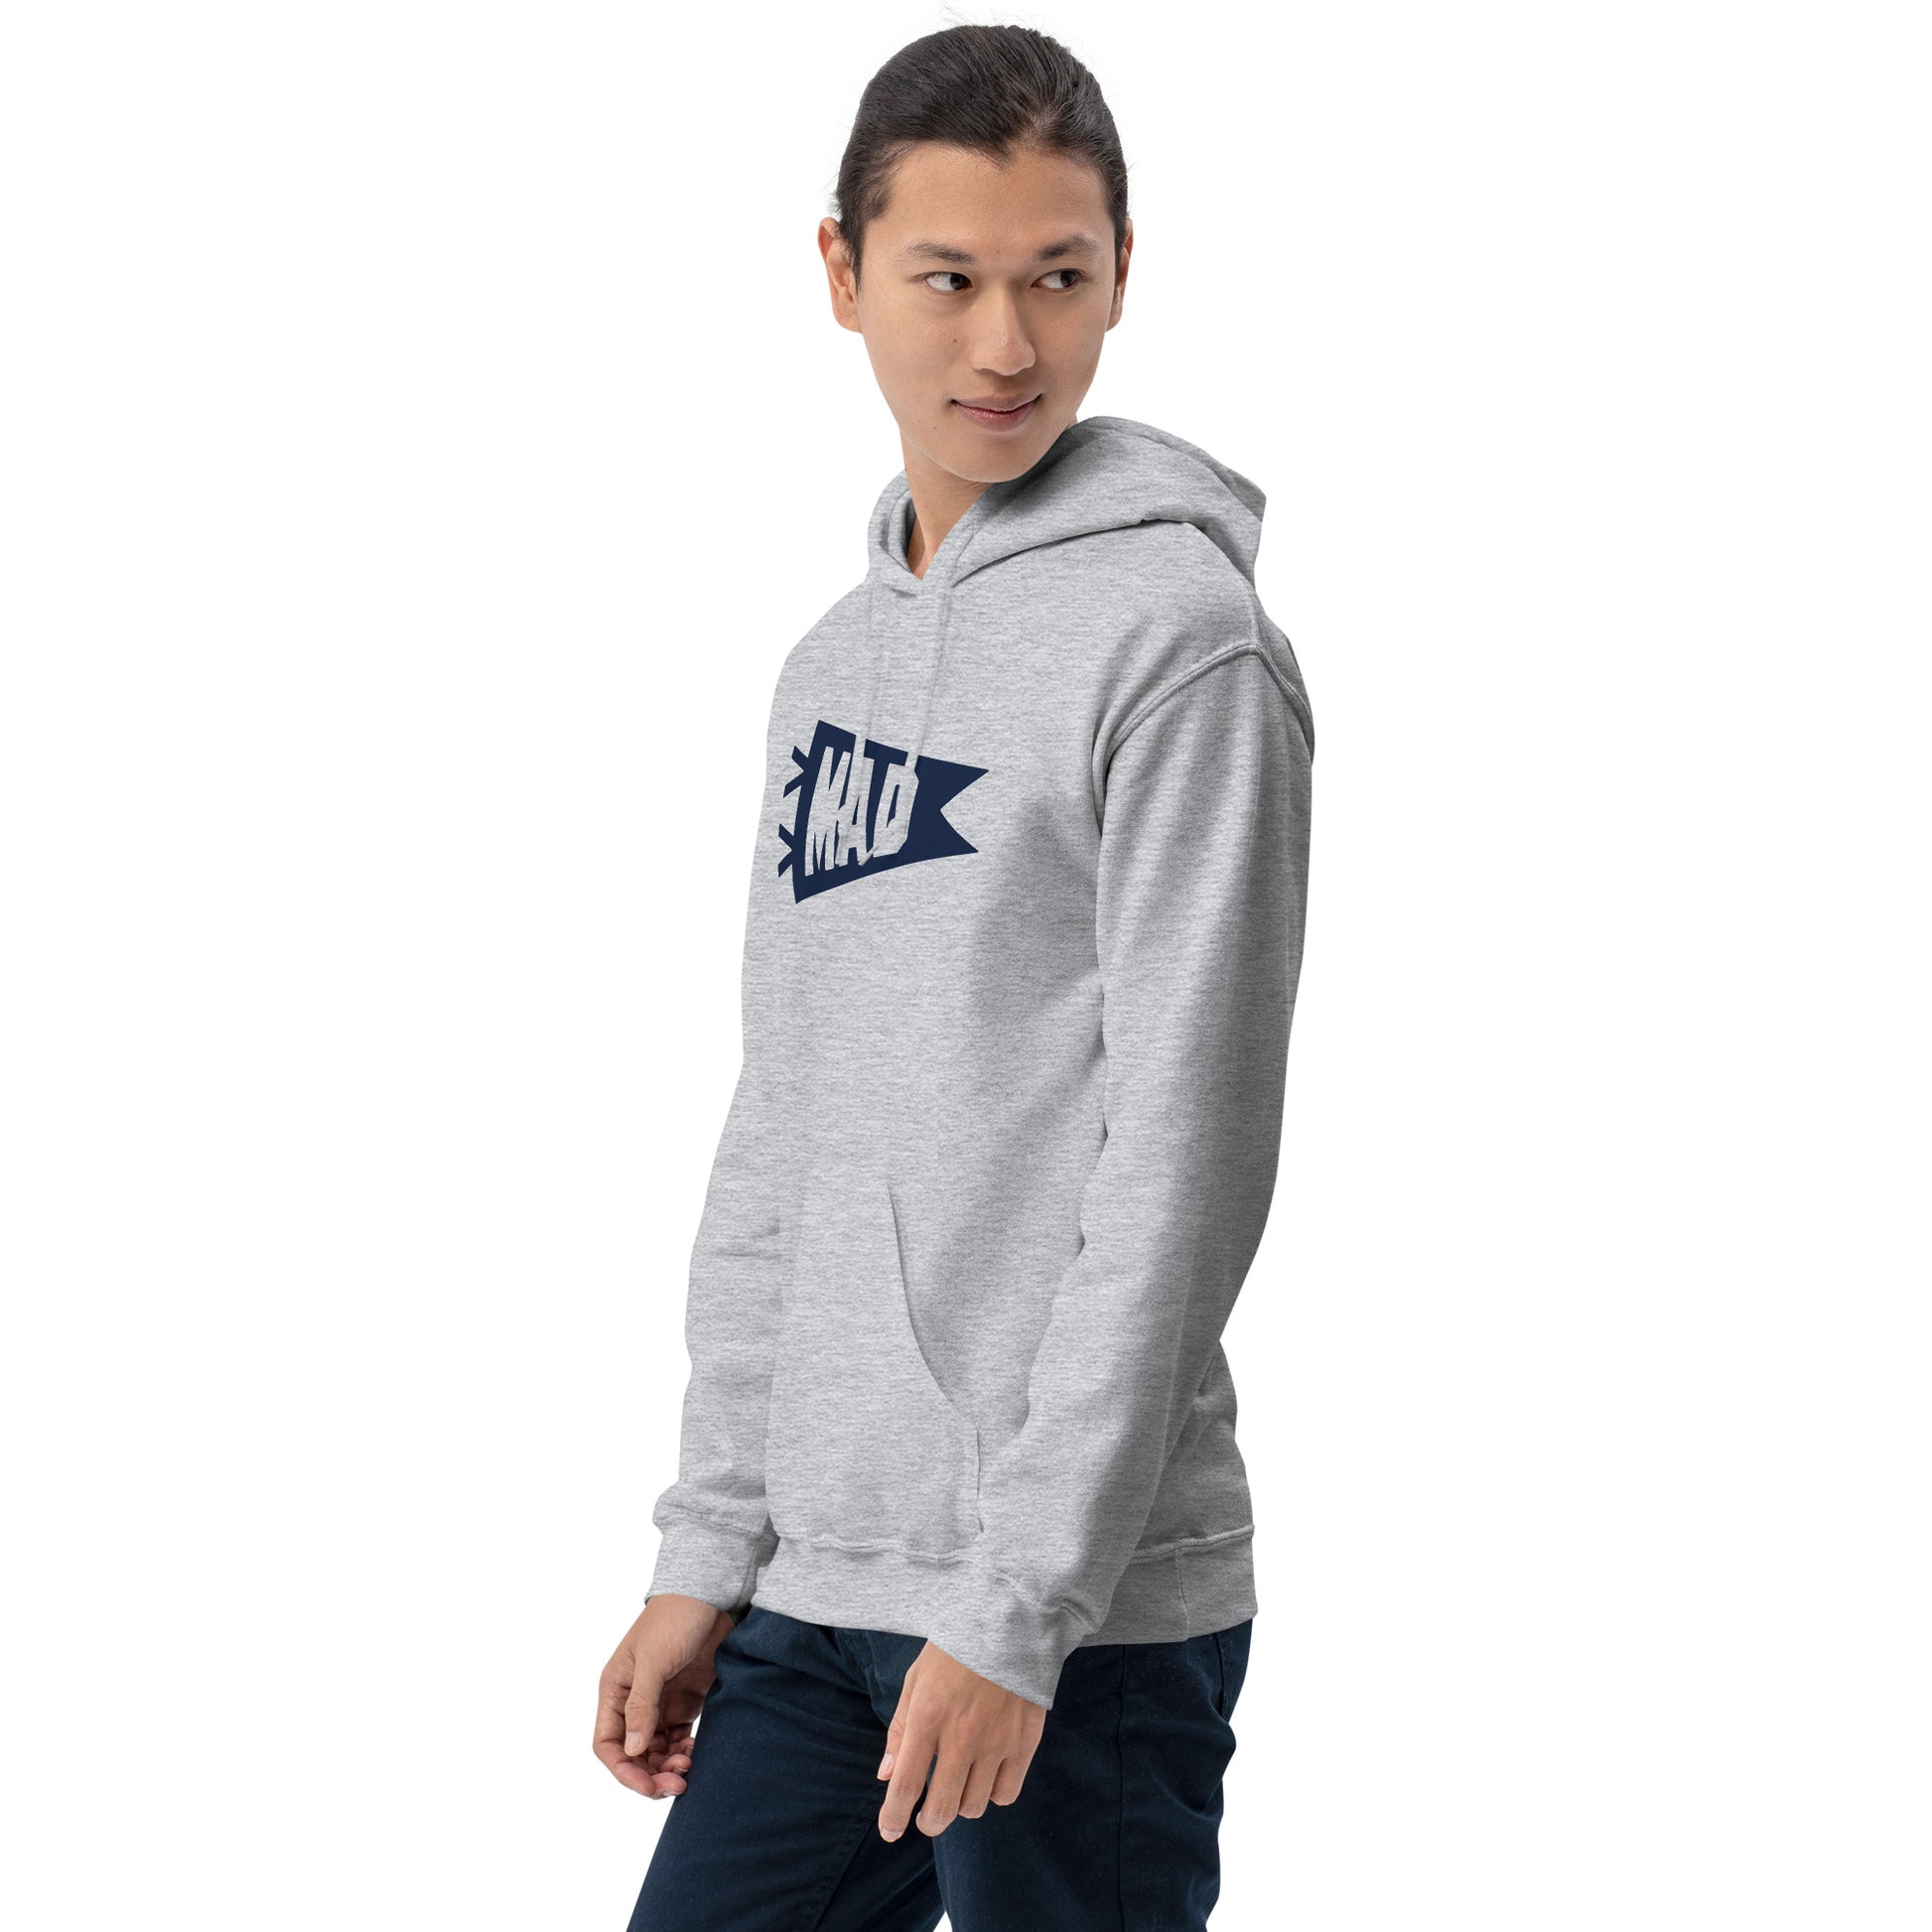 Airport Code Unisex Hoodie - Navy Blue Graphic • MAD Madrid • YHM Designs - Image 10